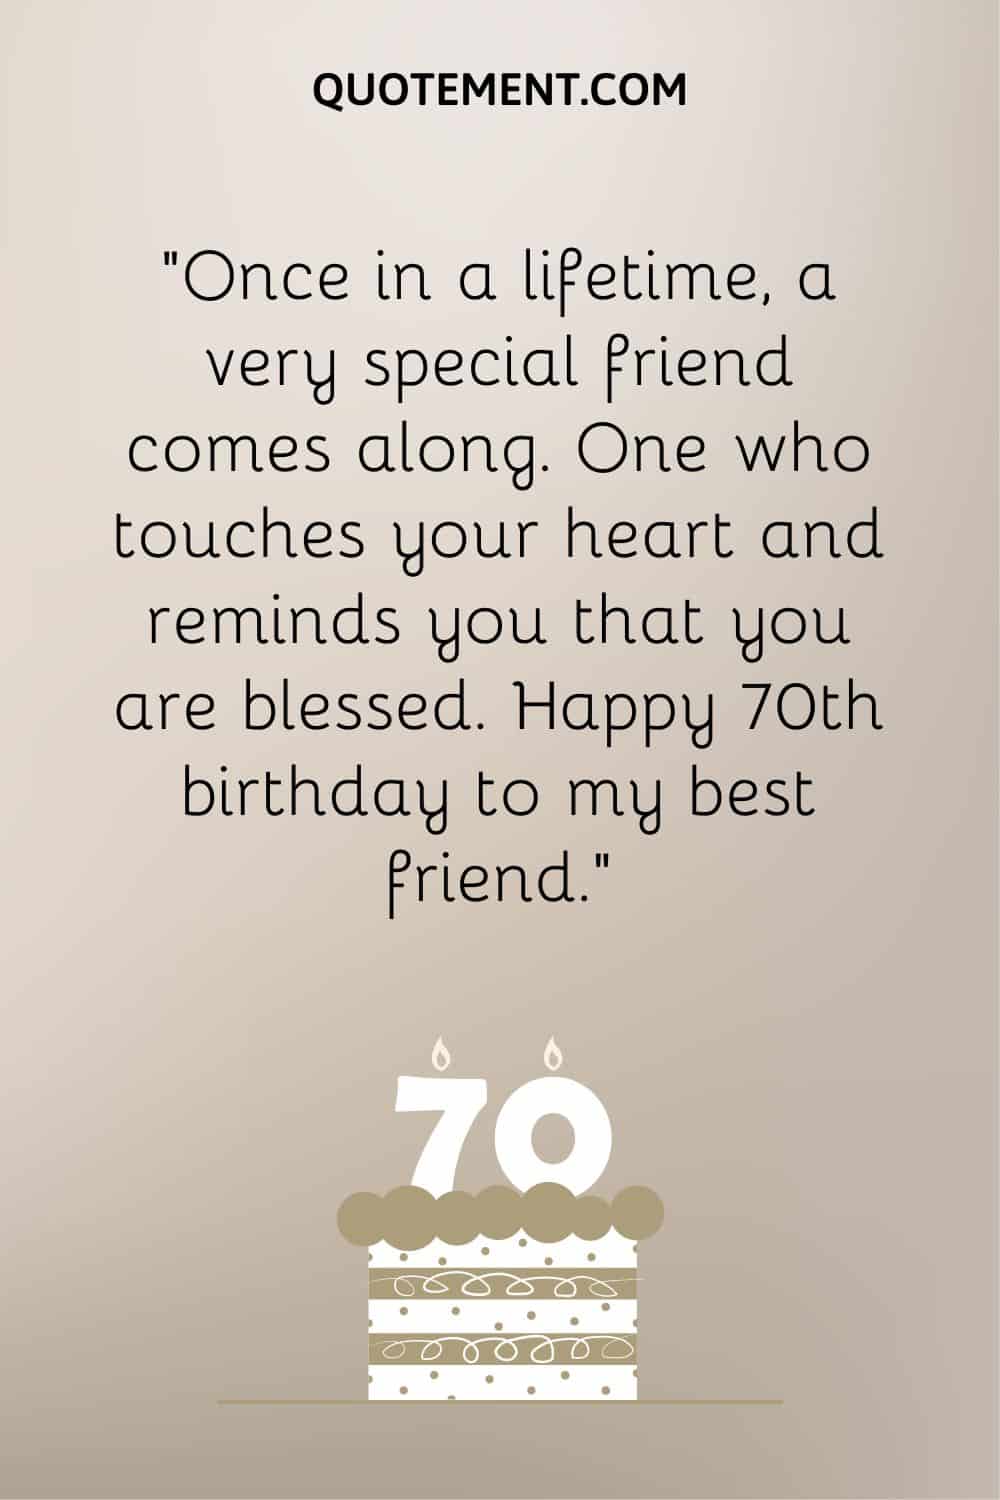 70th Birthday Wishes: Heartfelt Greetings for a Special Milestone